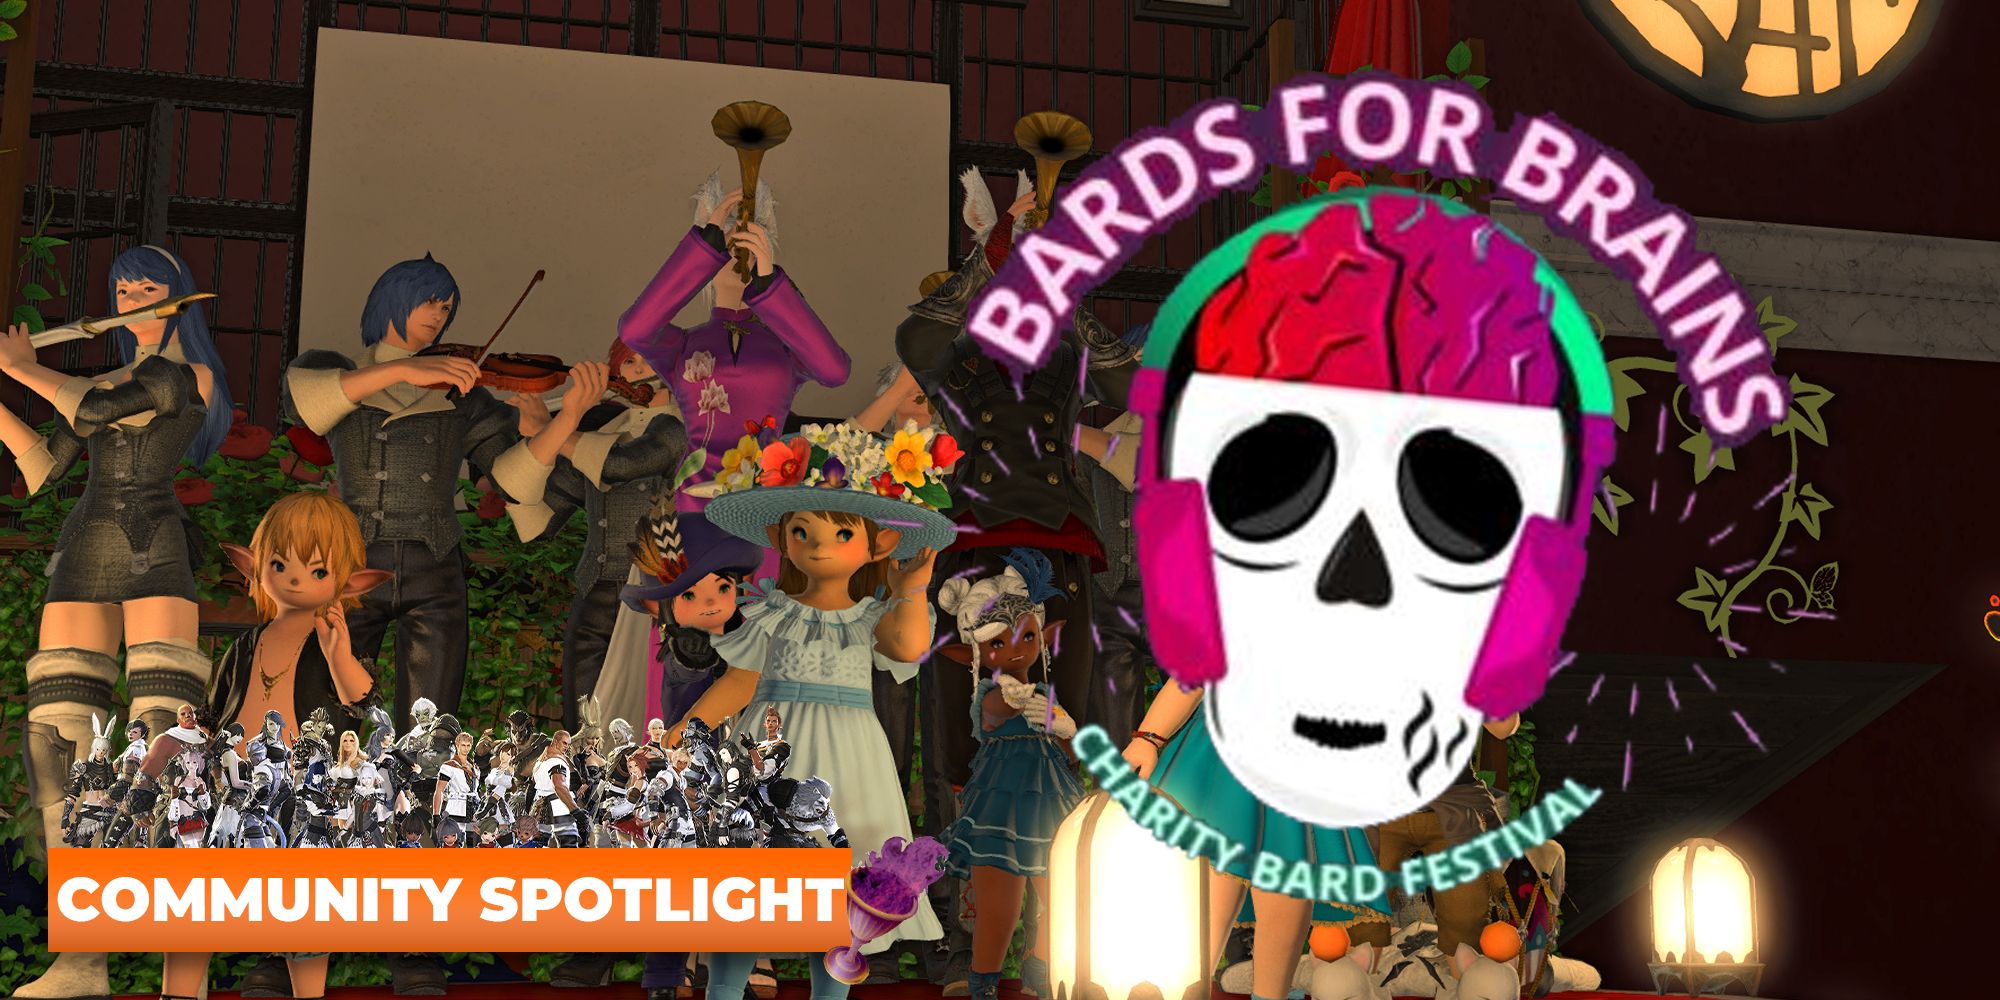 A bard band playing in Final Fantasy 14 with the Bards for Brains charity bard festival logo overlaid on the image.